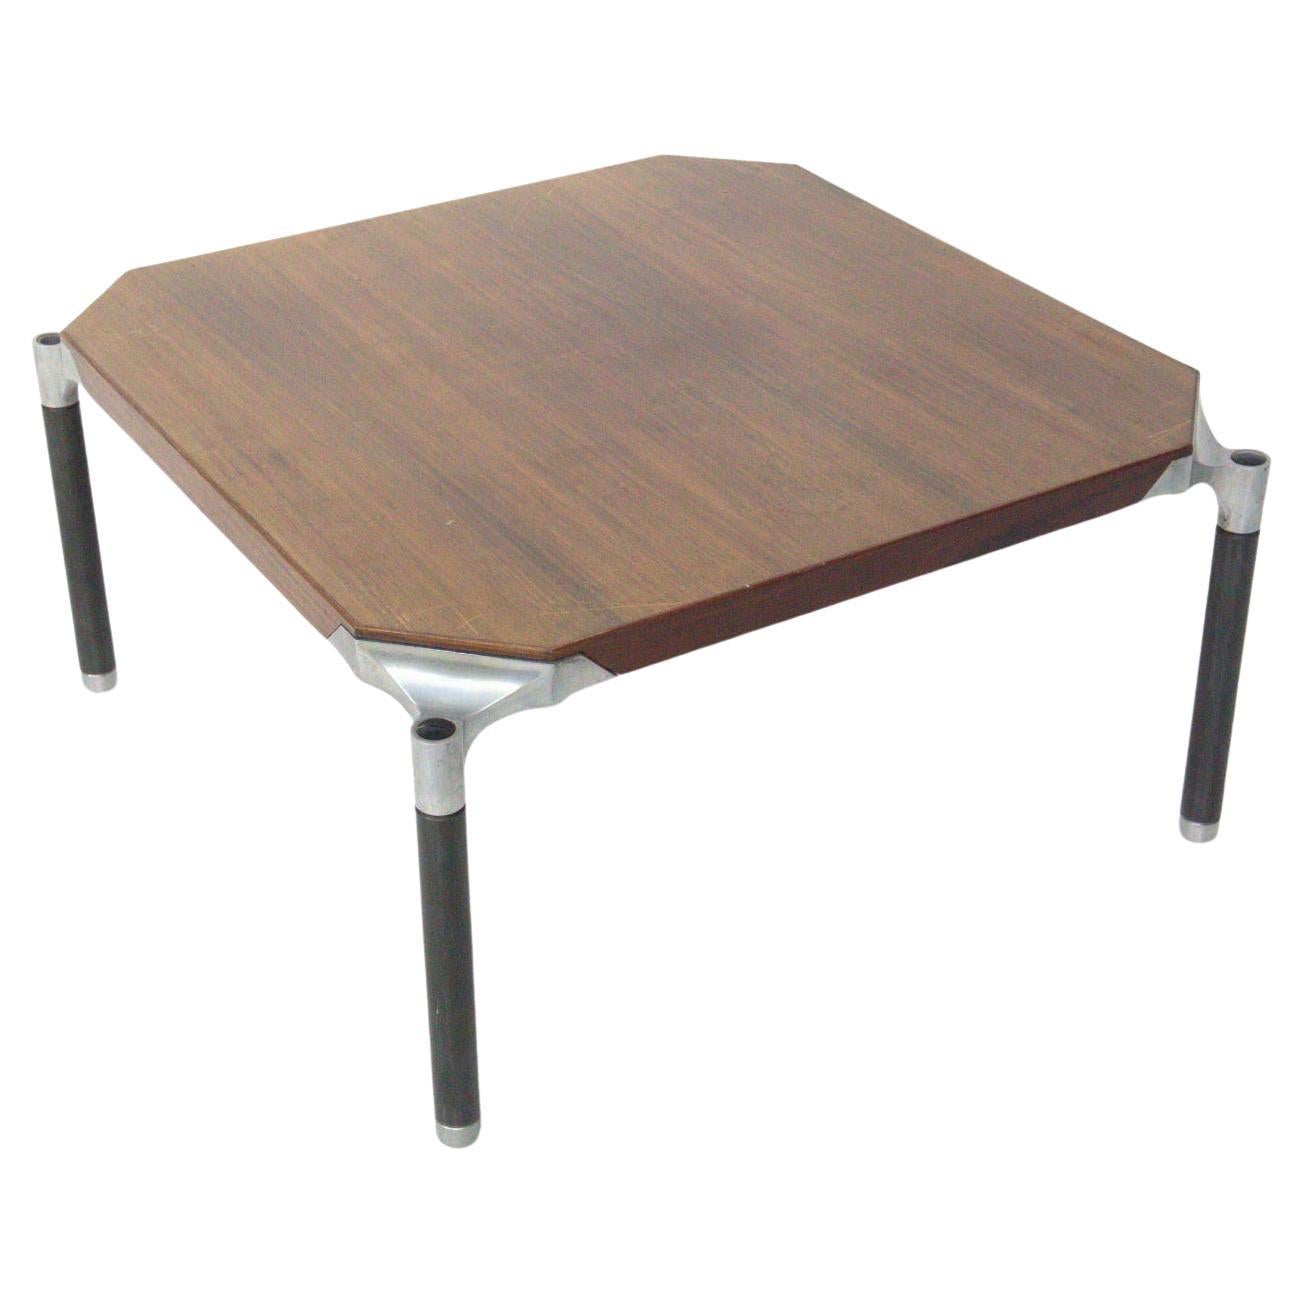 Ico Parisi Wooden Table for Mim Roma, Published For Sale